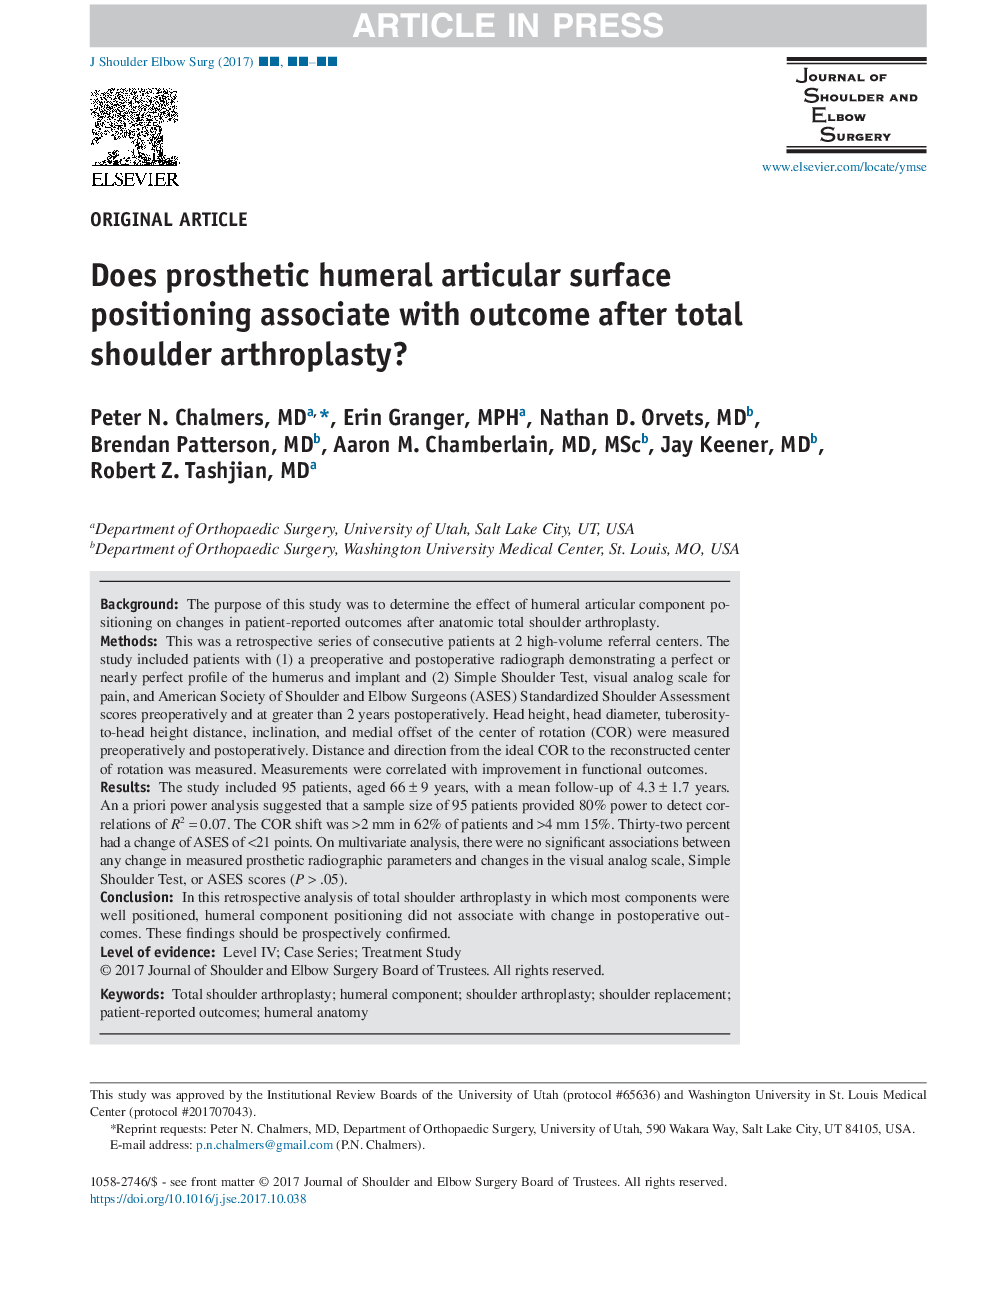 Does prosthetic humeral articular surface positioning associate with outcome after total shoulder arthroplasty?